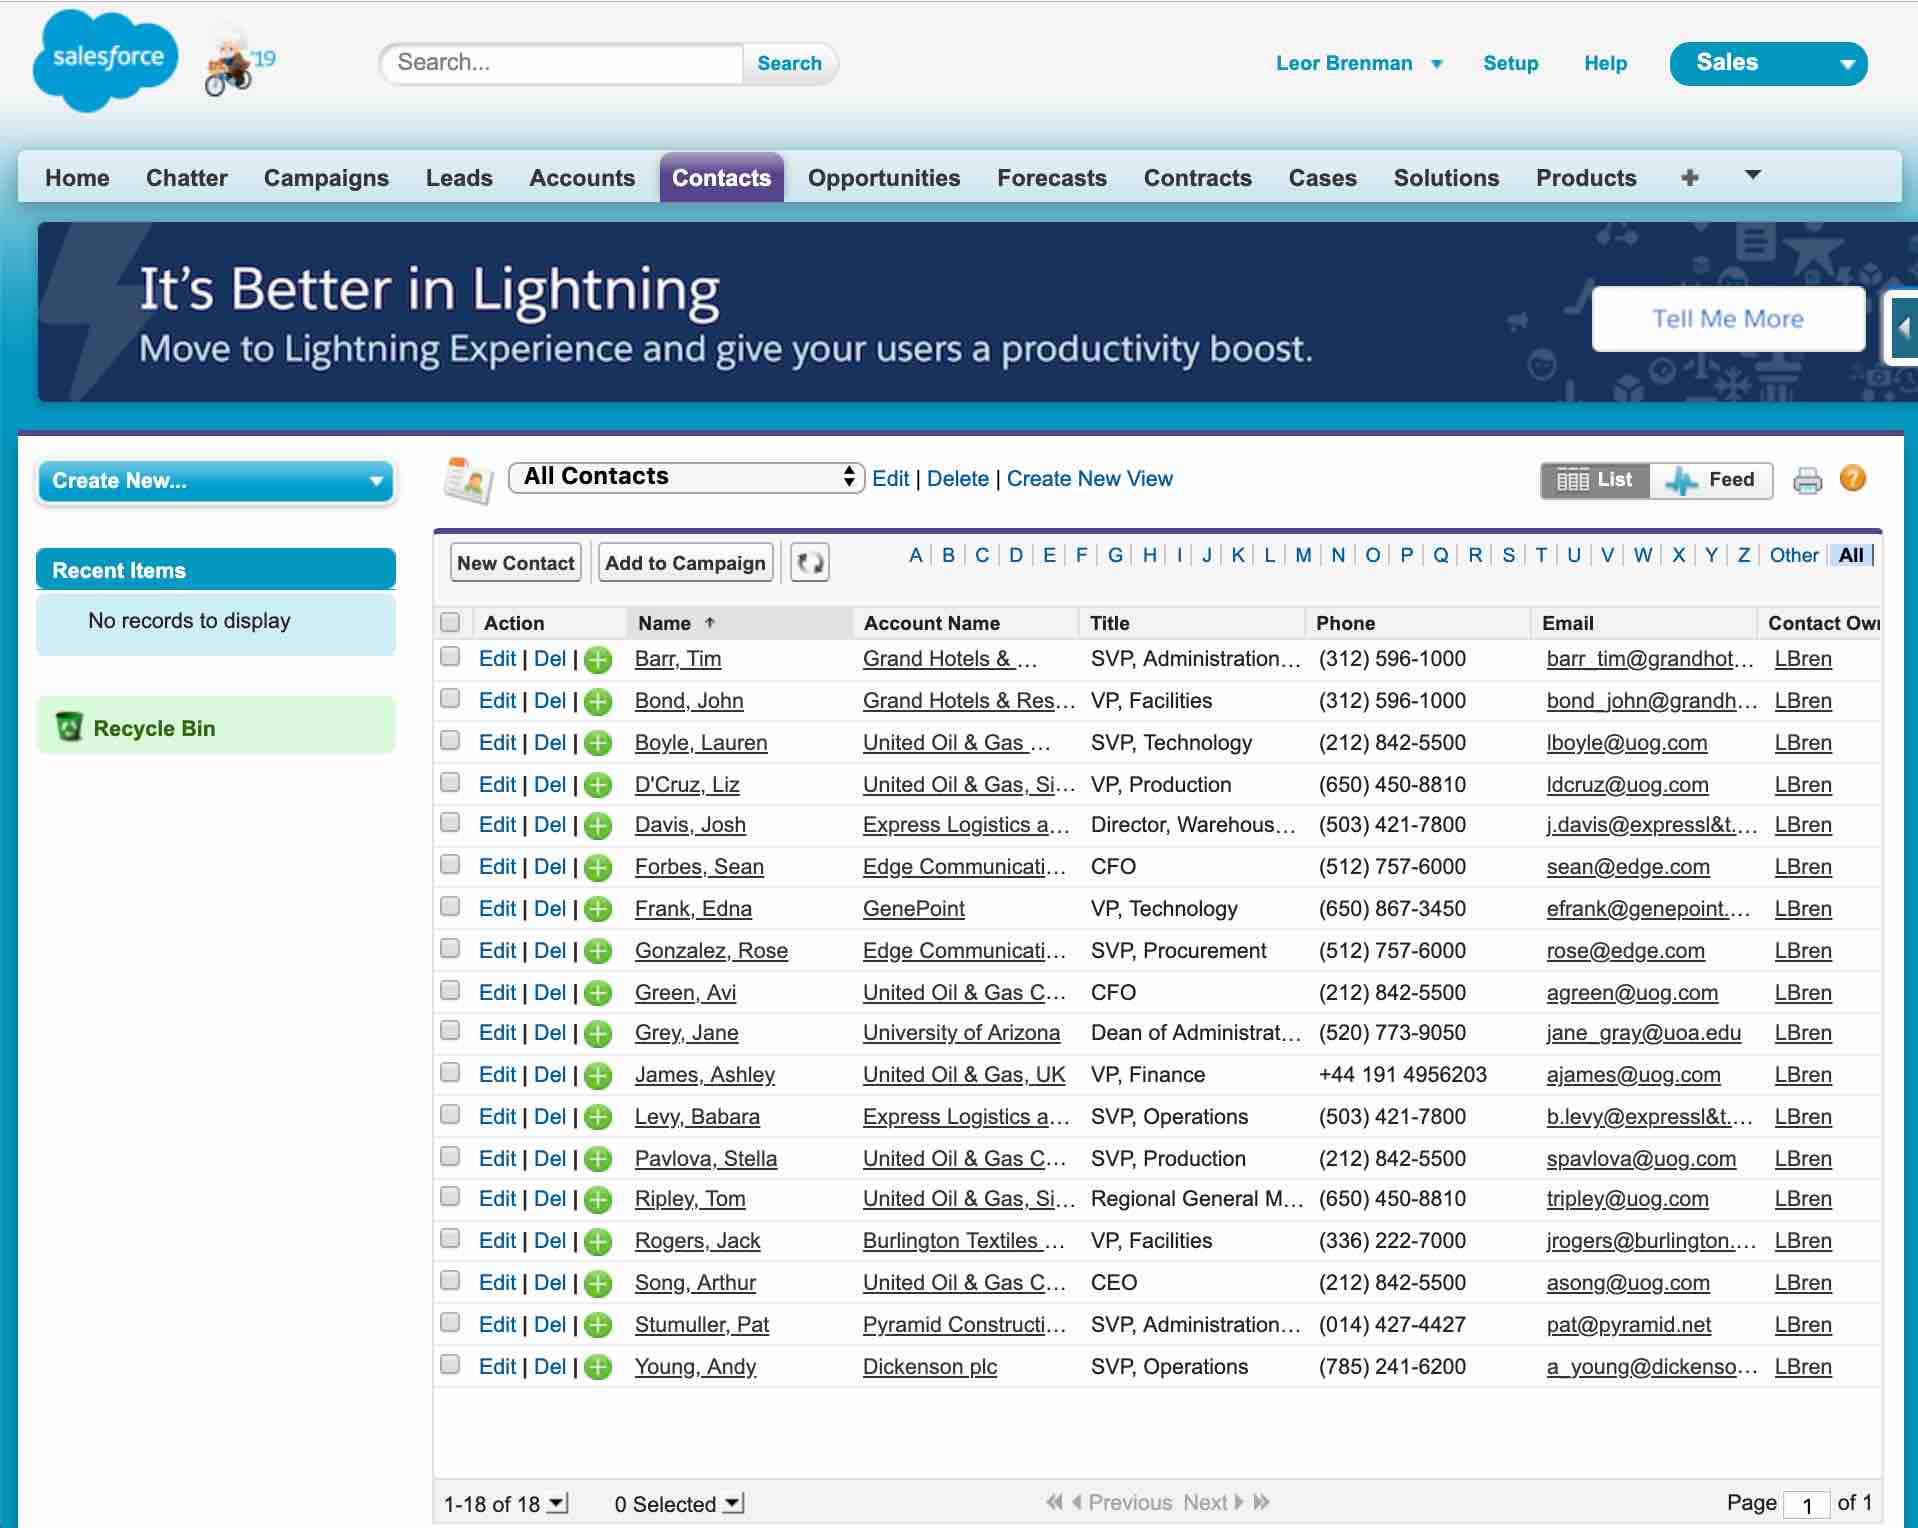 Review our Salesforce contacts